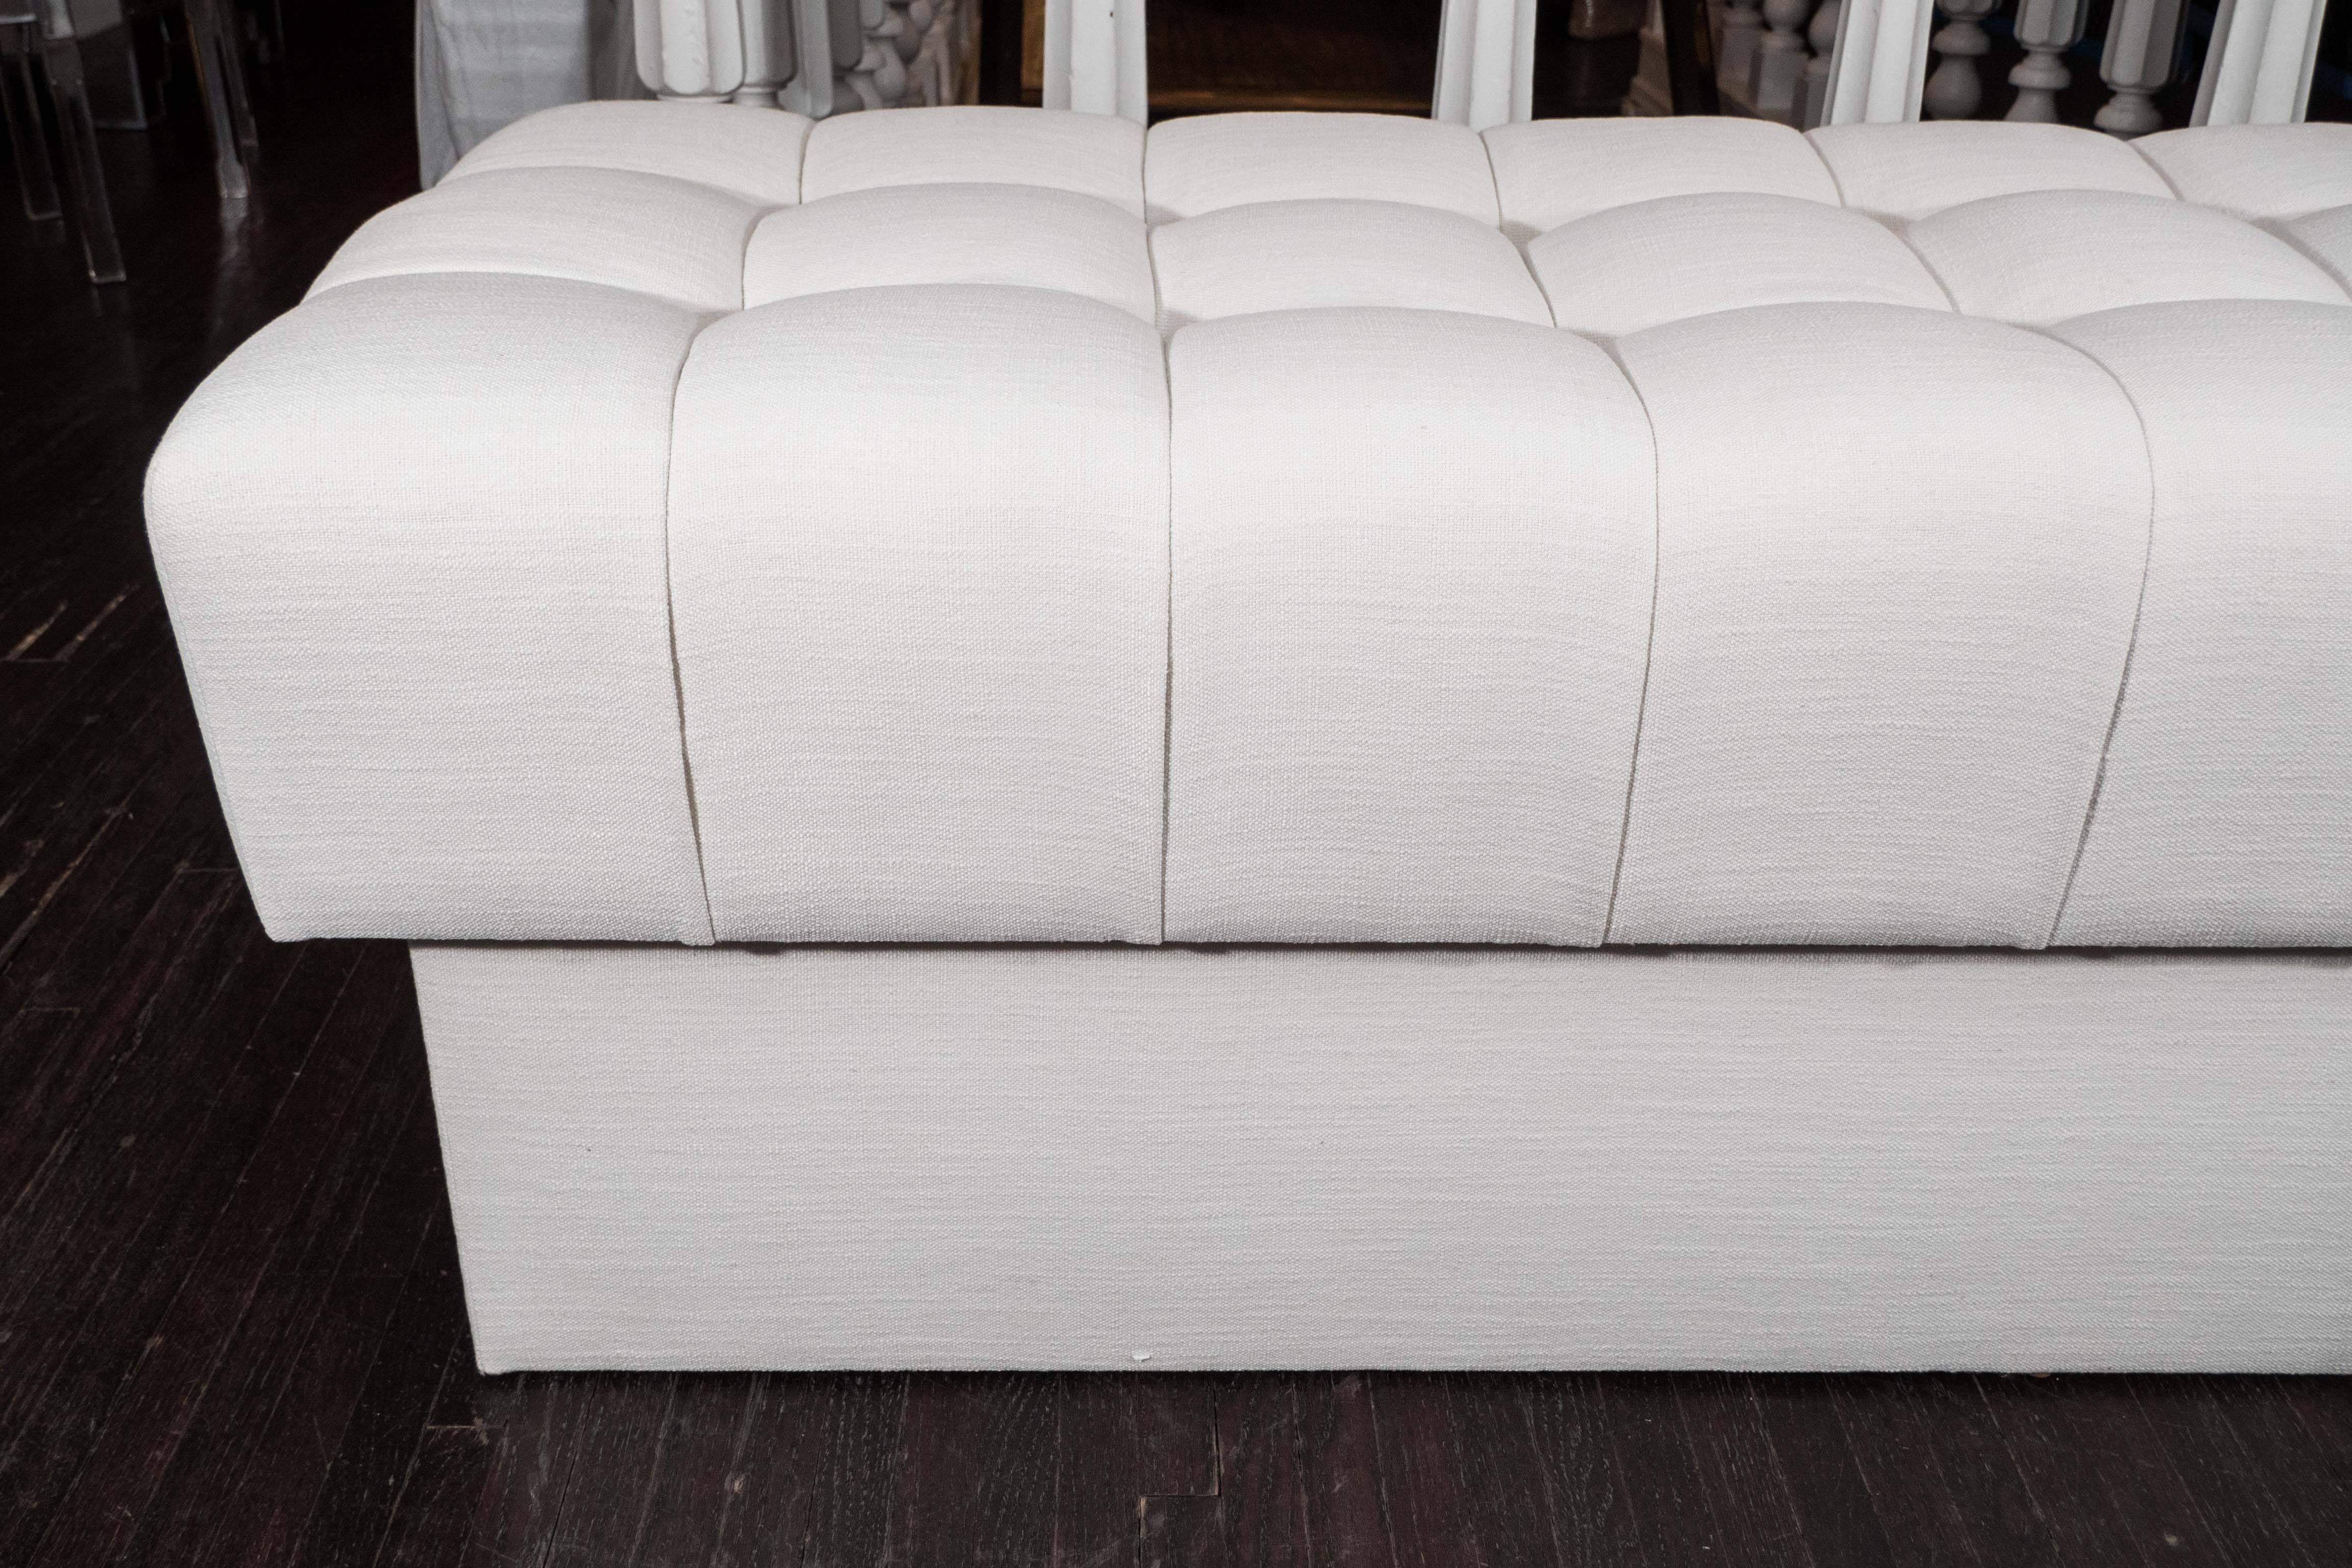 Fully upholstered tufted bench. 
COM (4 yards).